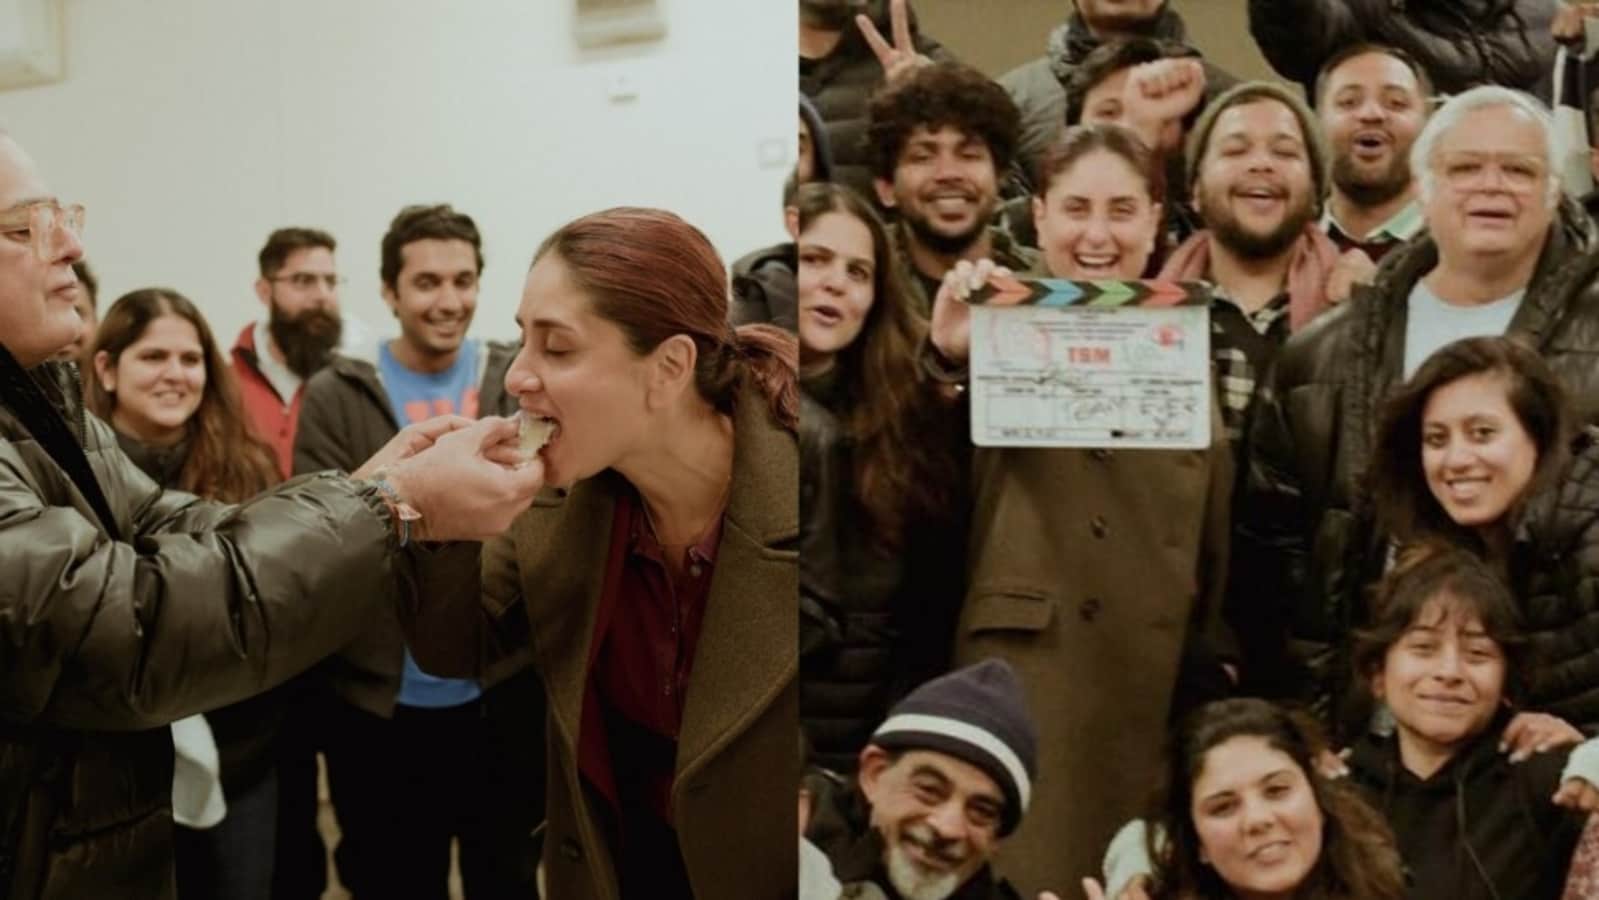 Kareena Kapoor eats cake, poses with ‘best team ever’ as she wraps up Hansal Mehta’s film in London. See pics